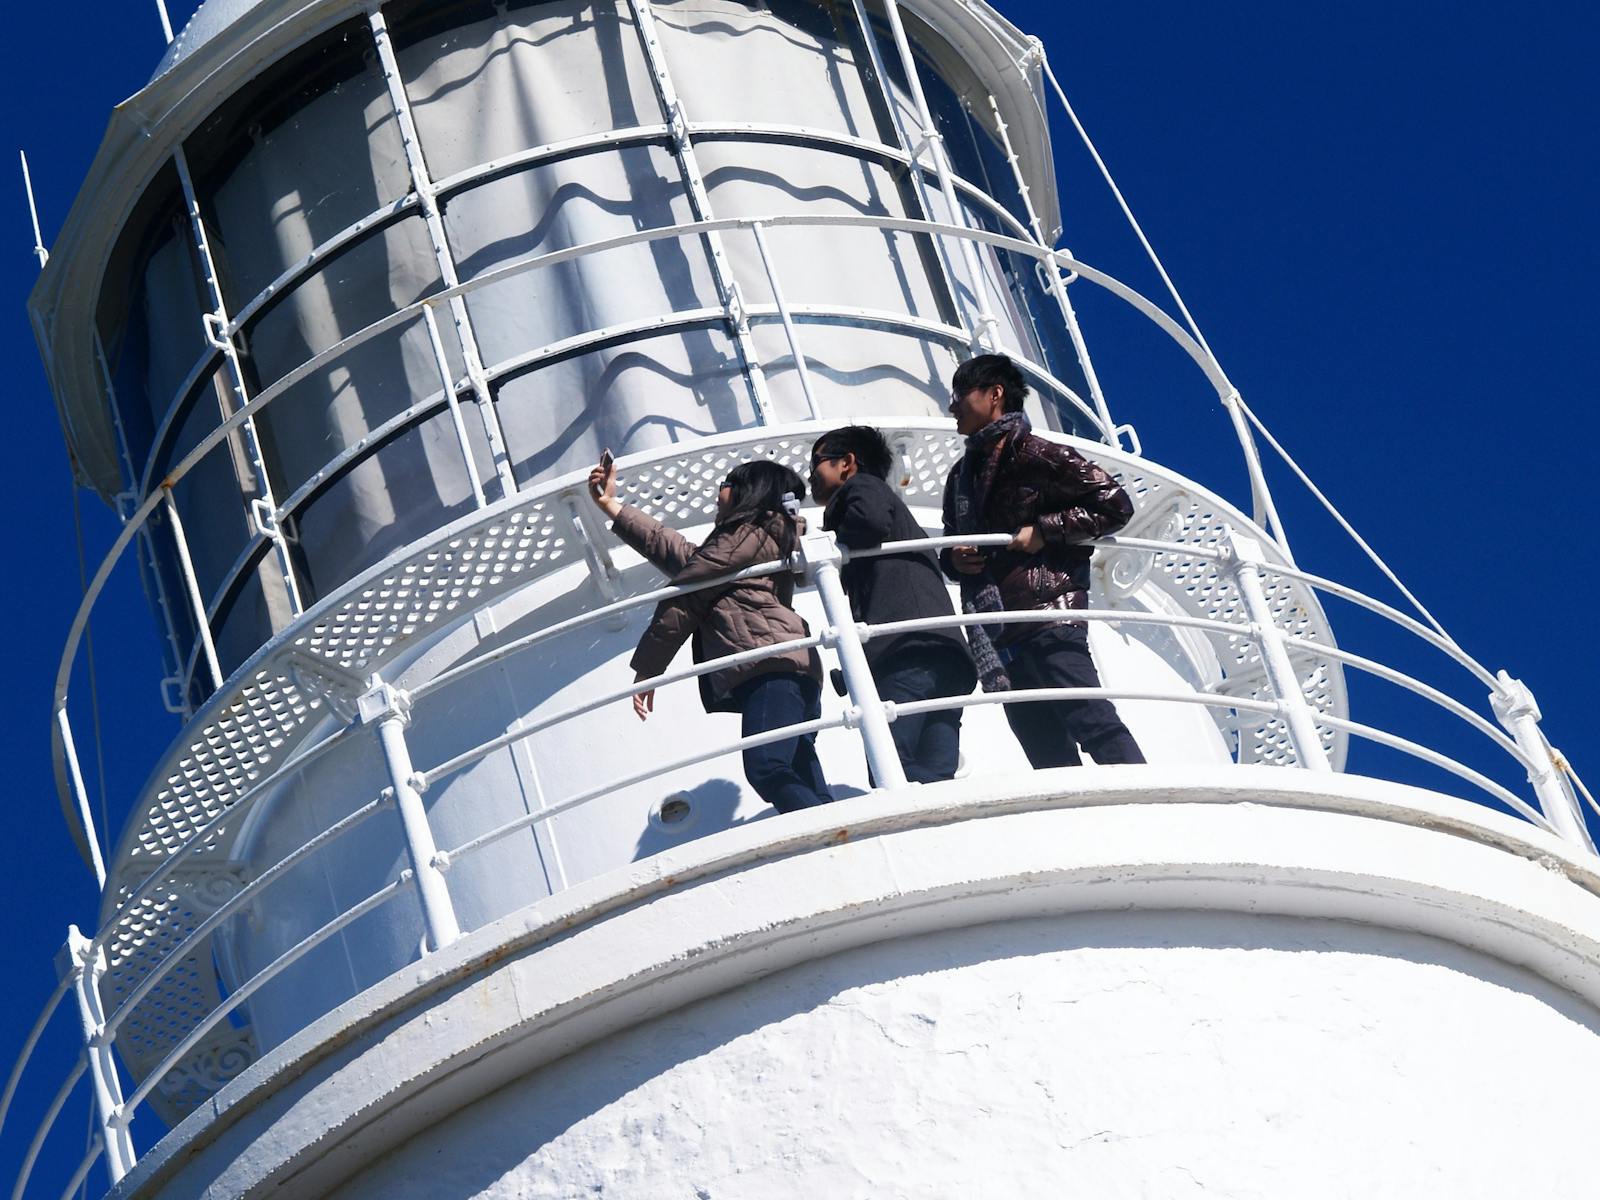 Join the Bruny Island Lighthouse Tour at Cape Bruny